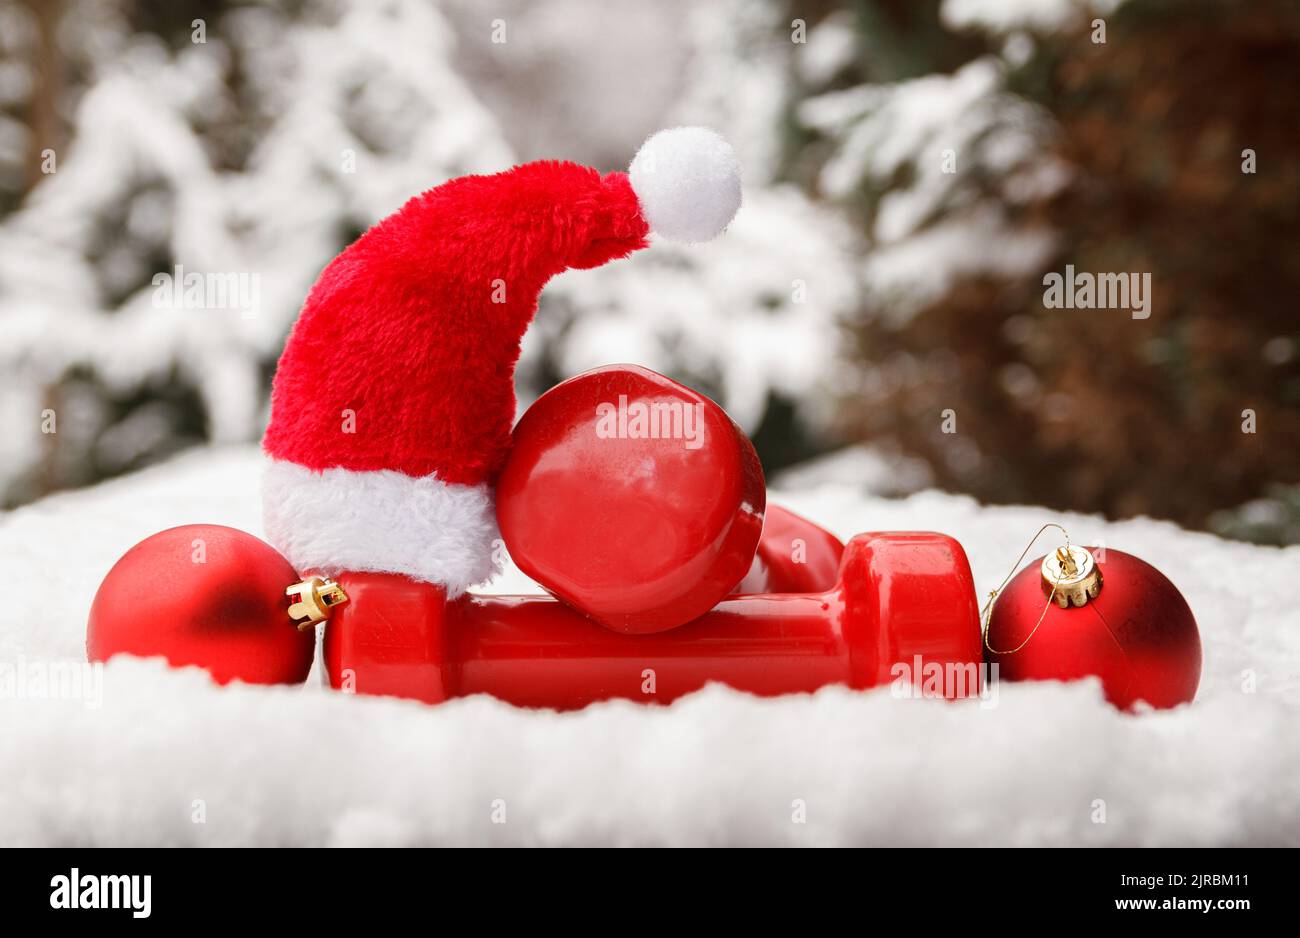 Red dumbbells, Santa Claus hat, Christmas baubles ornaments on white snow. Gym fitness holiday season concept. Winter workout, cold weather exercising. Stock Photo